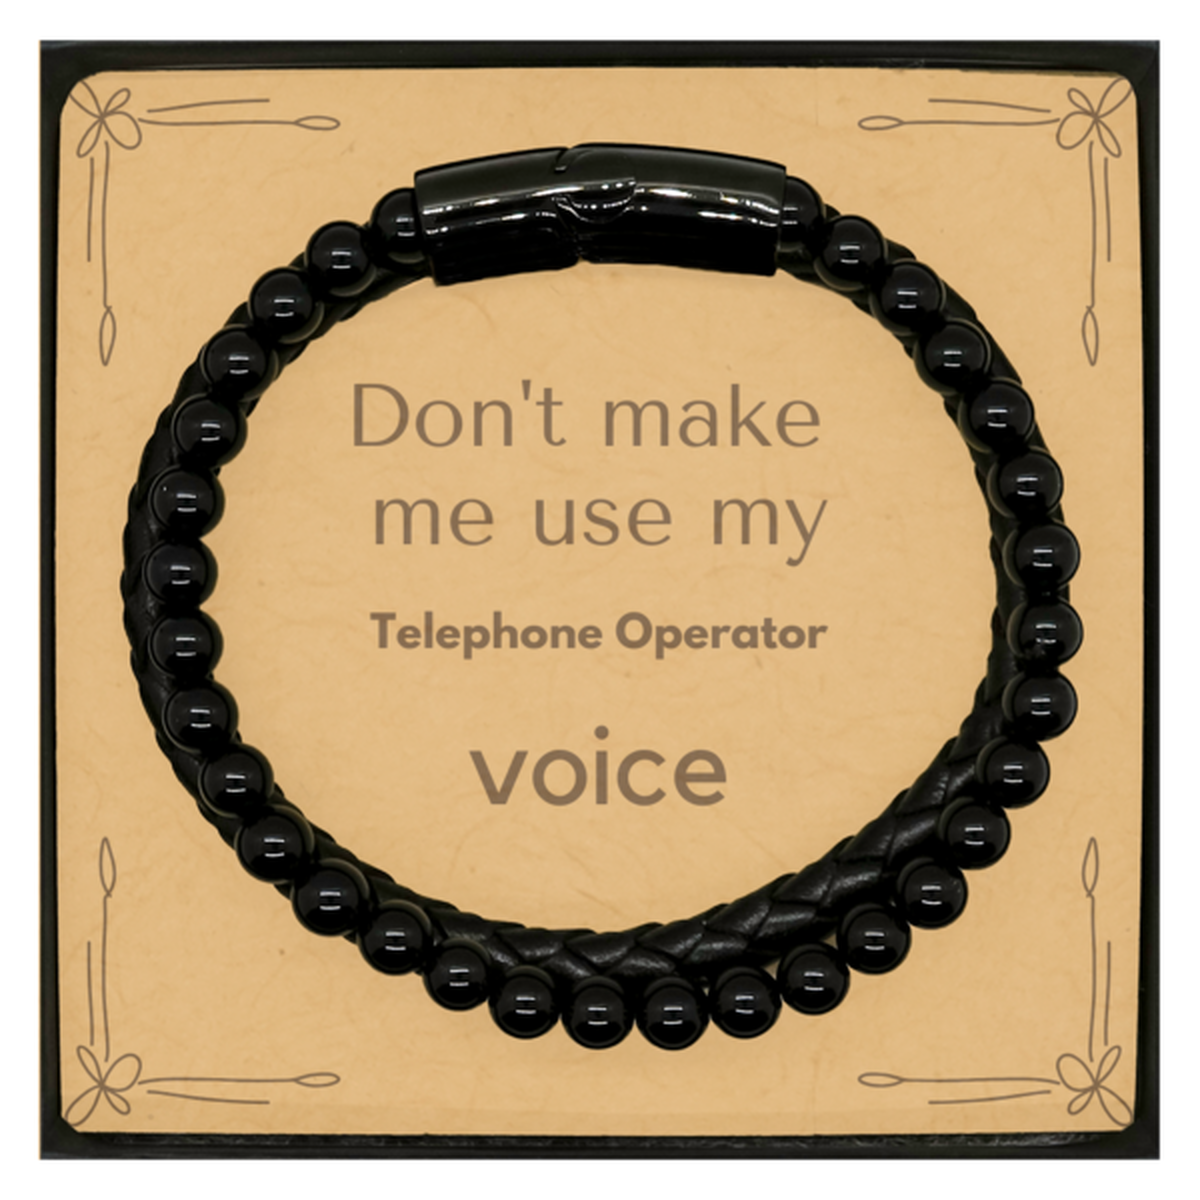 Don't make me use my Telephone Operator voice, Sarcasm Telephone Operator Card Gifts, Christmas Telephone Operator Stone Leather Bracelets Birthday Unique Gifts For Telephone Operator Coworkers, Men, Women, Colleague, Friends